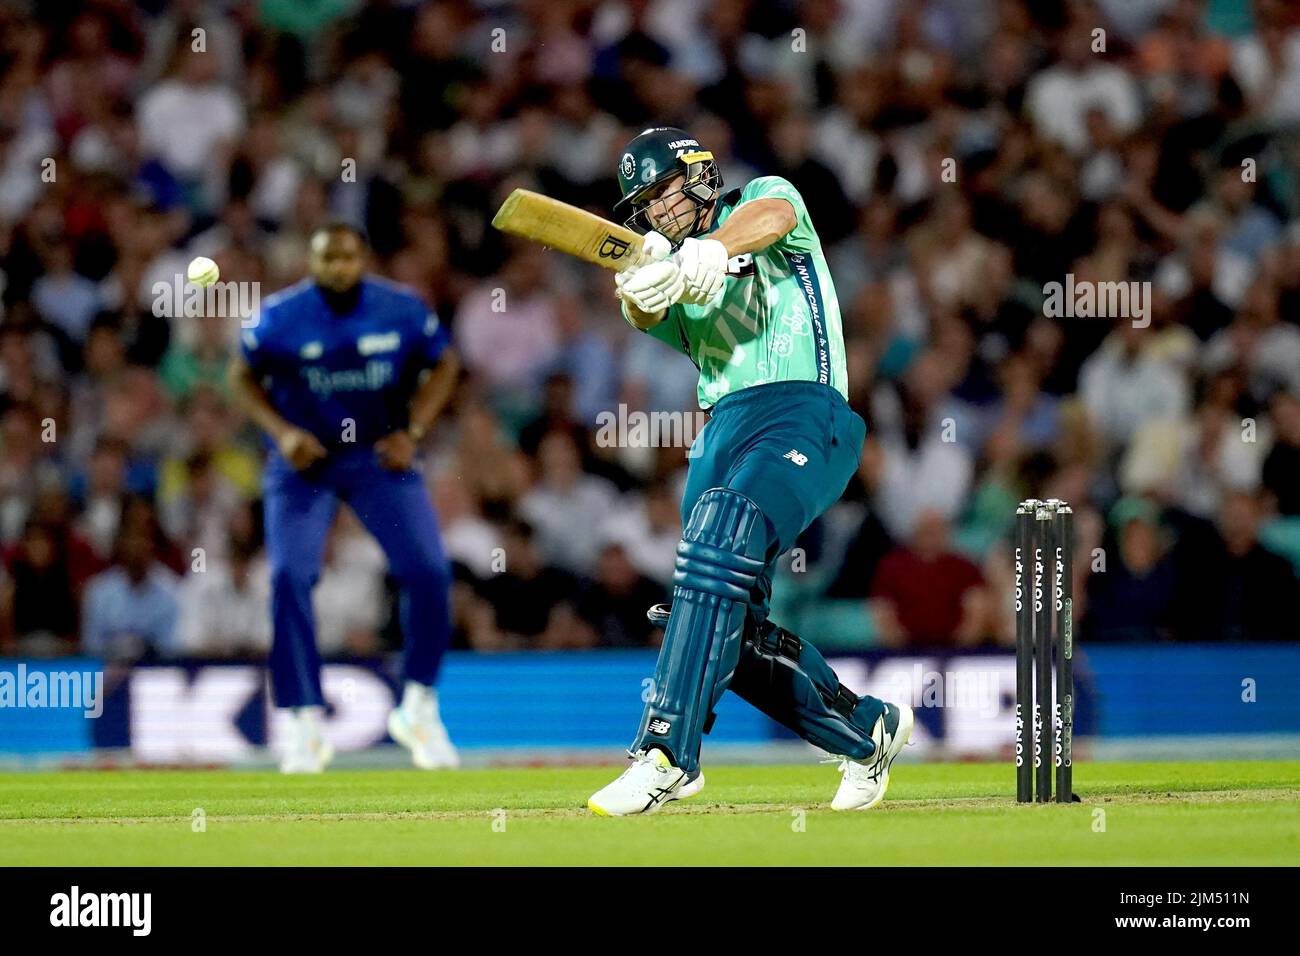 Oval Invincible's Hilton Cartwright batting during The Hundred match at The Kia Oval, London. Picture date: Thursday August 4, 2022. Stock Photo